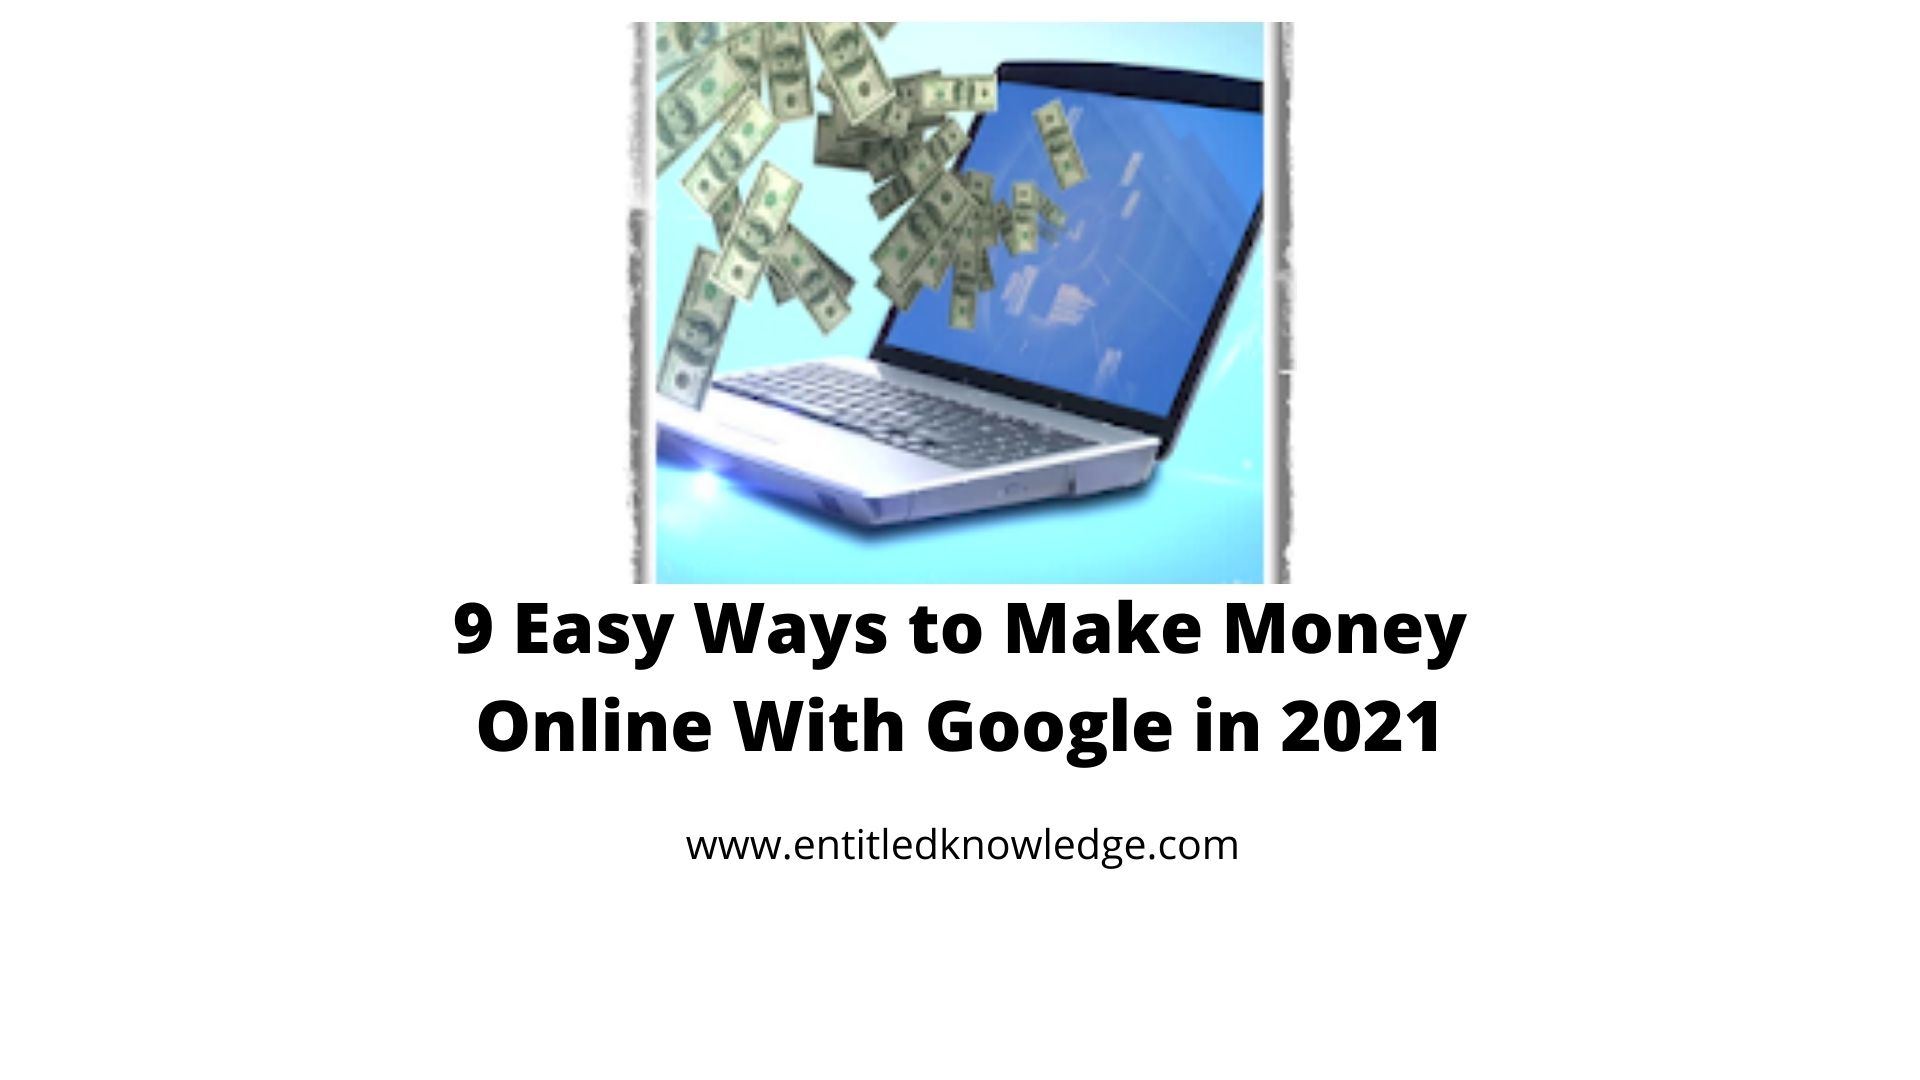 9 Easy Ways to Make Money Online With Google in 2021